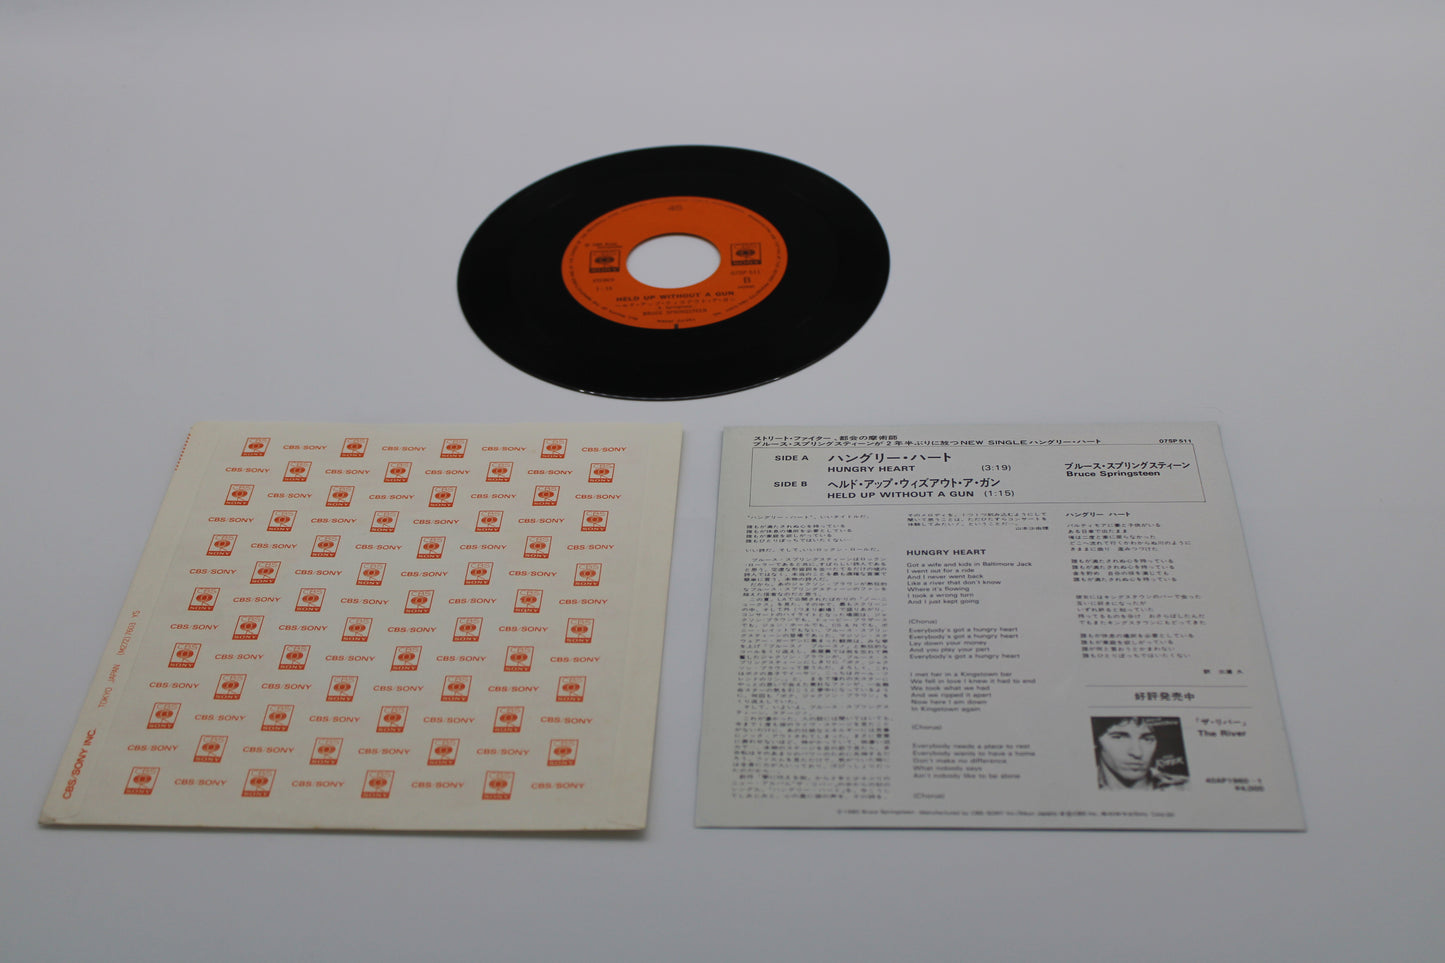 Hungry Heart 45 Single with Picture Sleeve and Lyric Insert - Withdrawn in Japan 1980